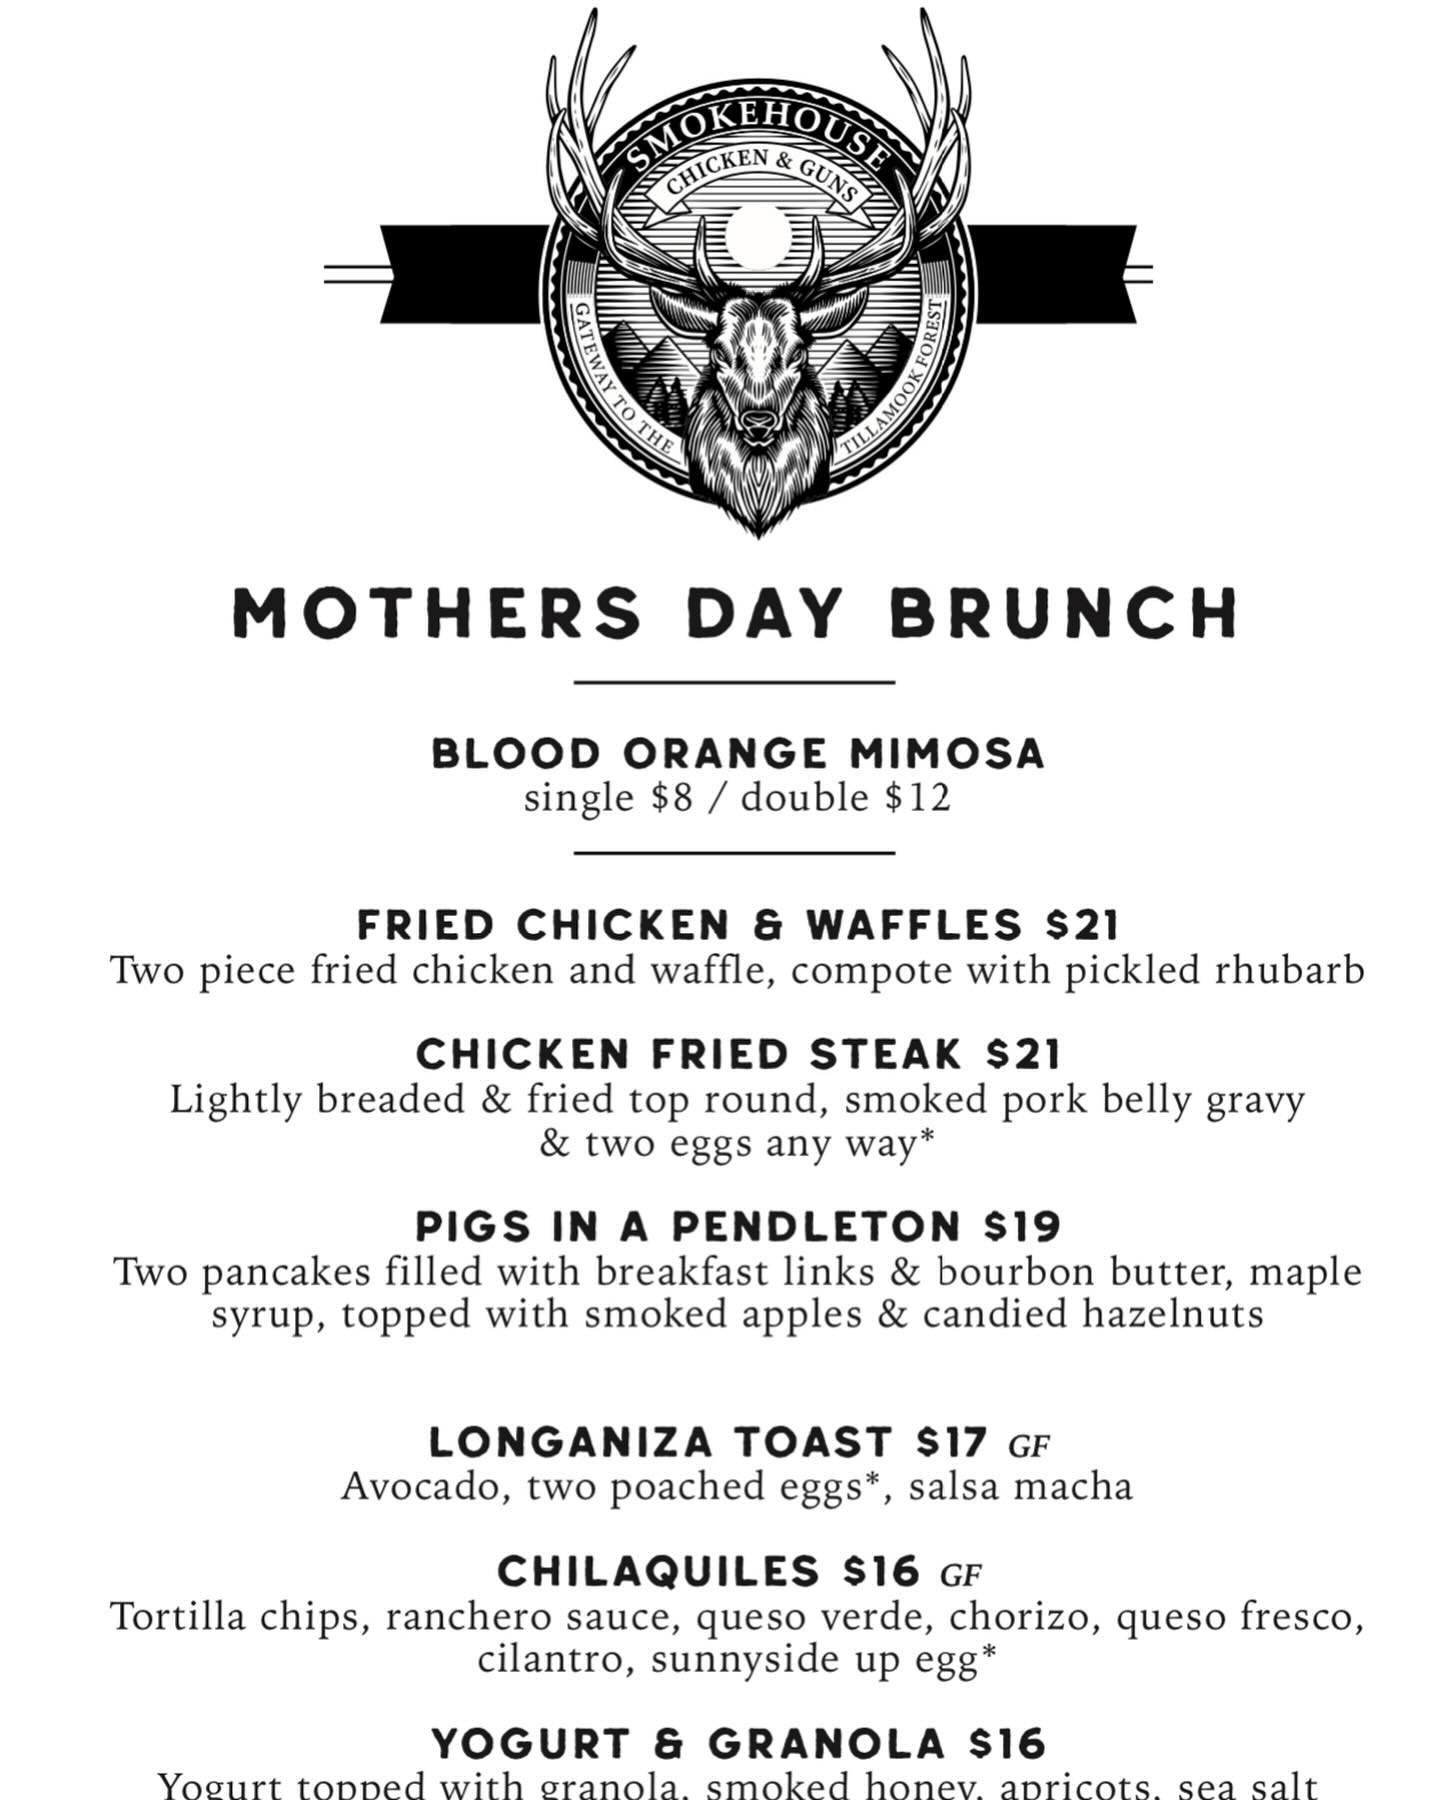 Last year Mother&rsquo;s Day brunch was a handful! We were understaffed and underprepared. This year we&rsquo;re full staffed and prepared with a perfect menu to serve you and your soon to be drunk mom! see you on Sunday!